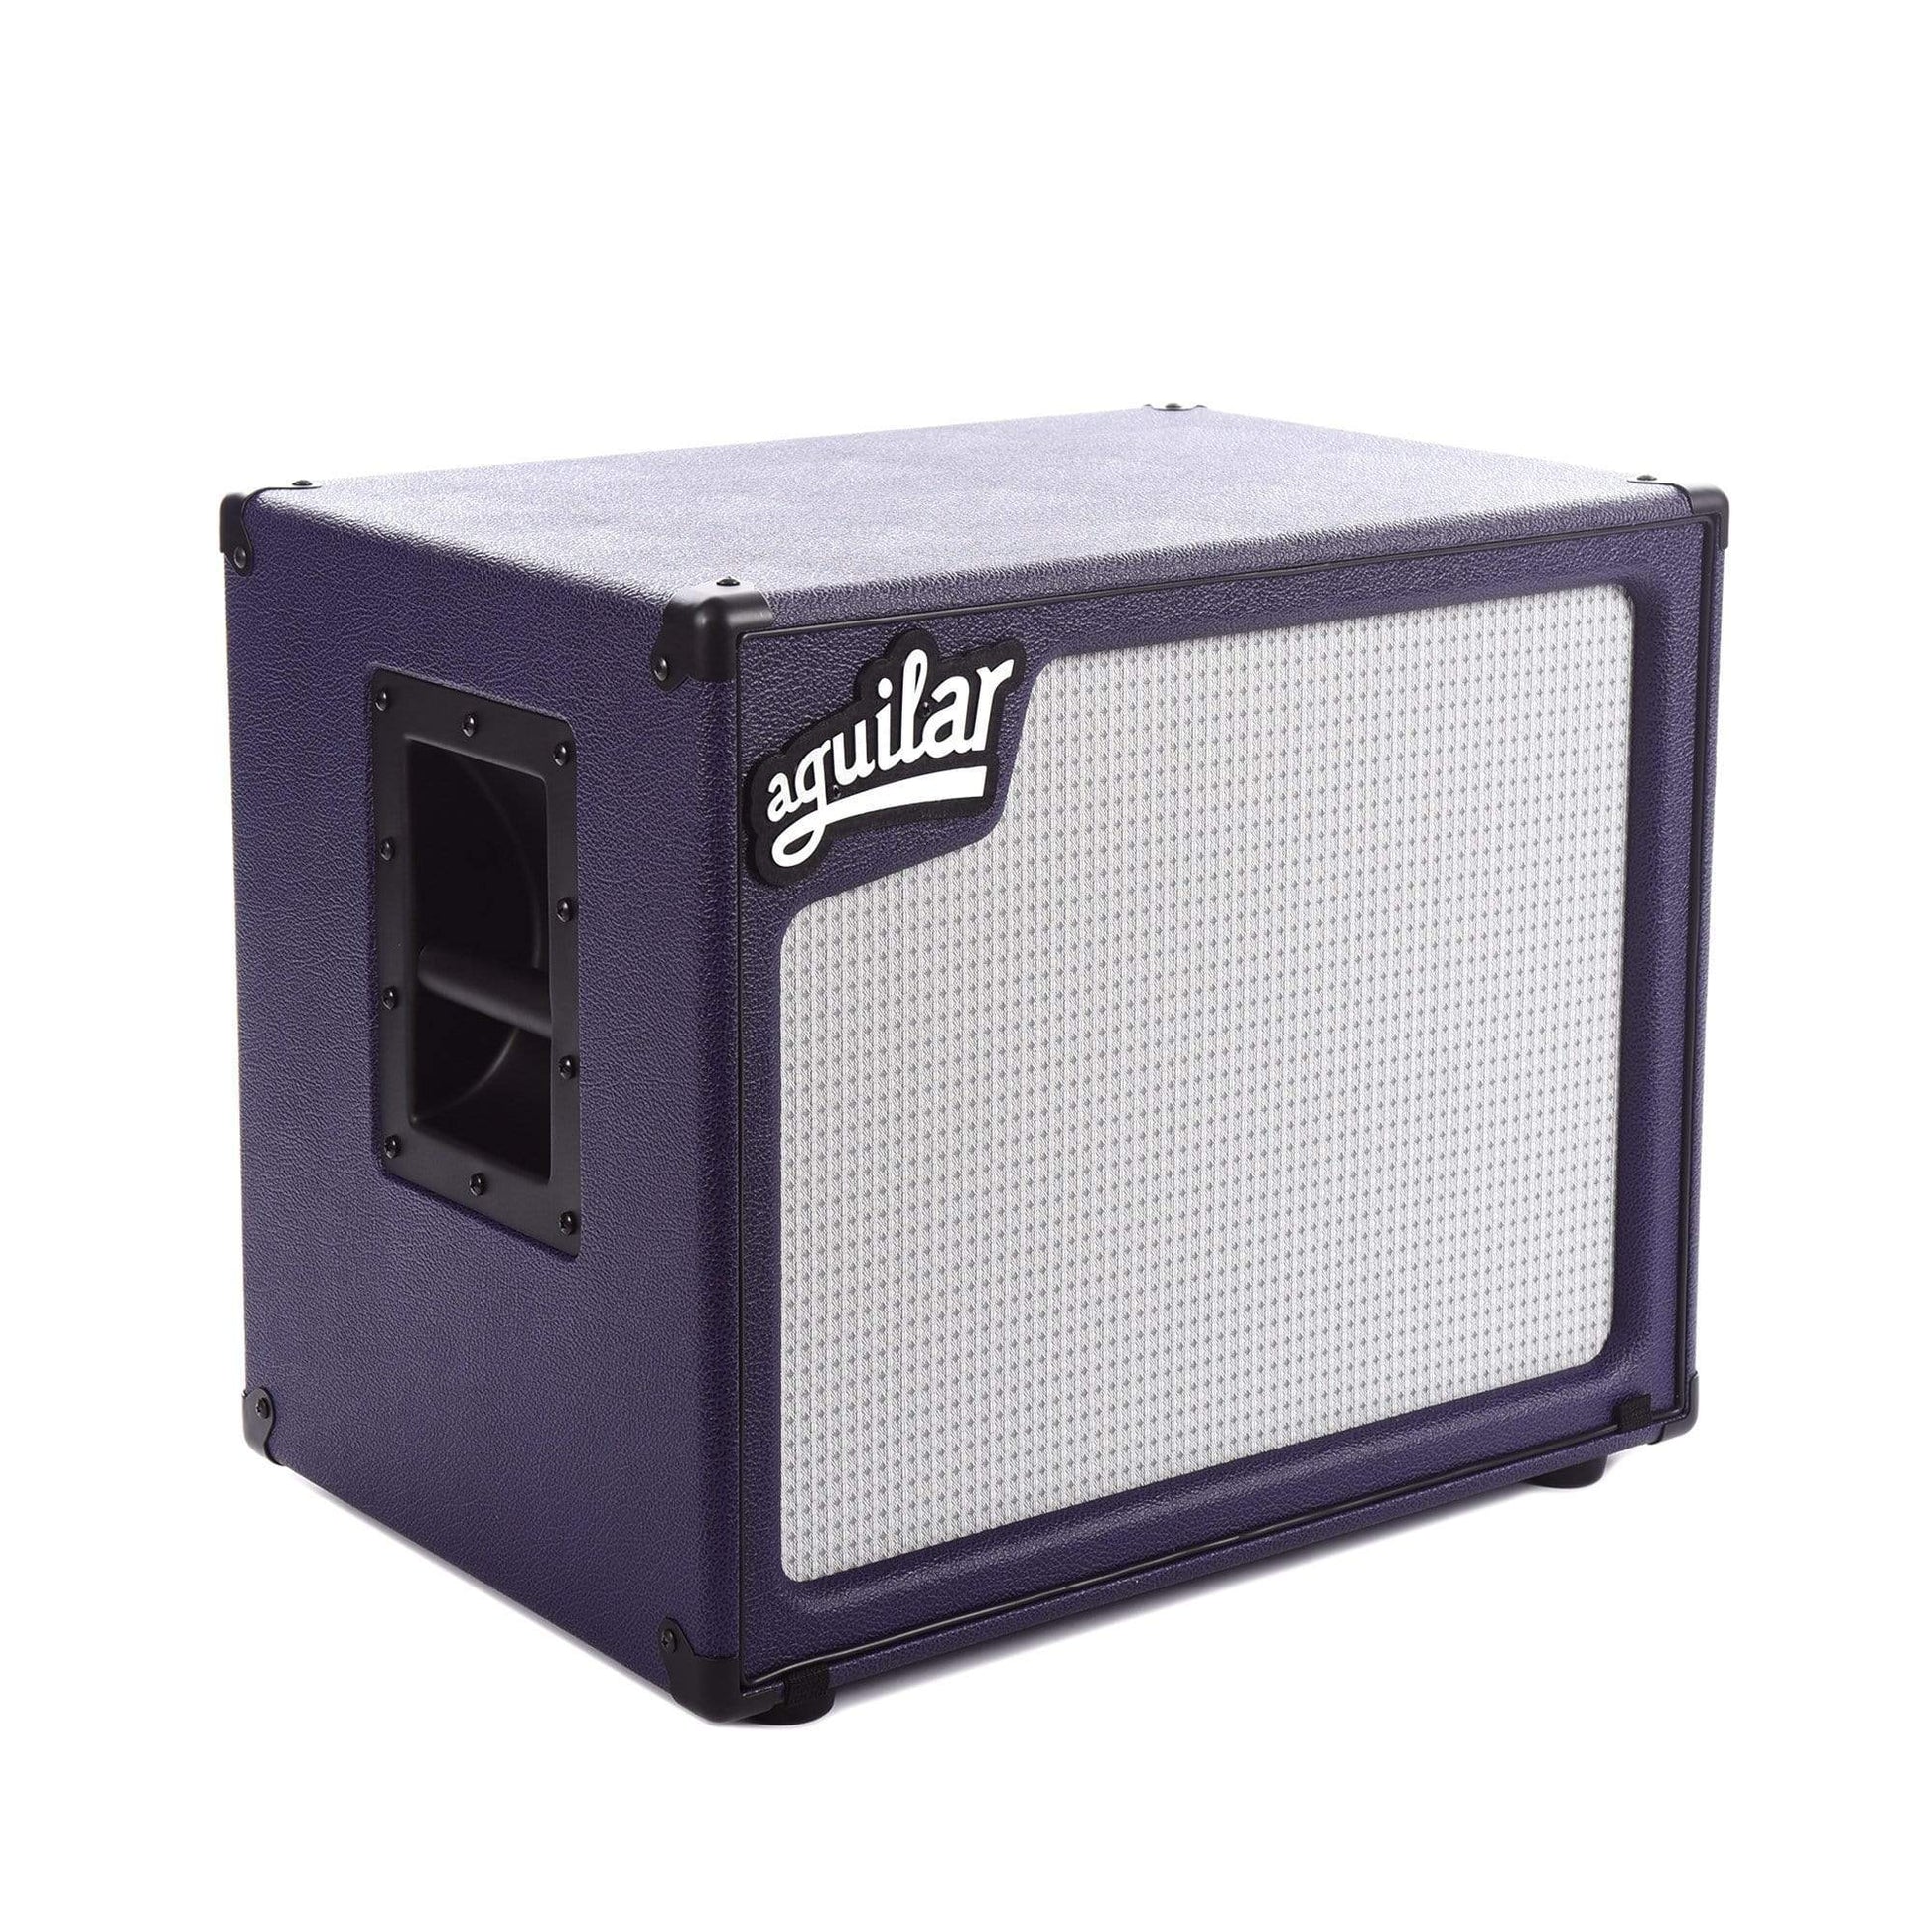 Aguilar Limited Edition SL 210 Super Light Bass Cabinet 4 ohm Royal Purple Amps / Bass Cabinets